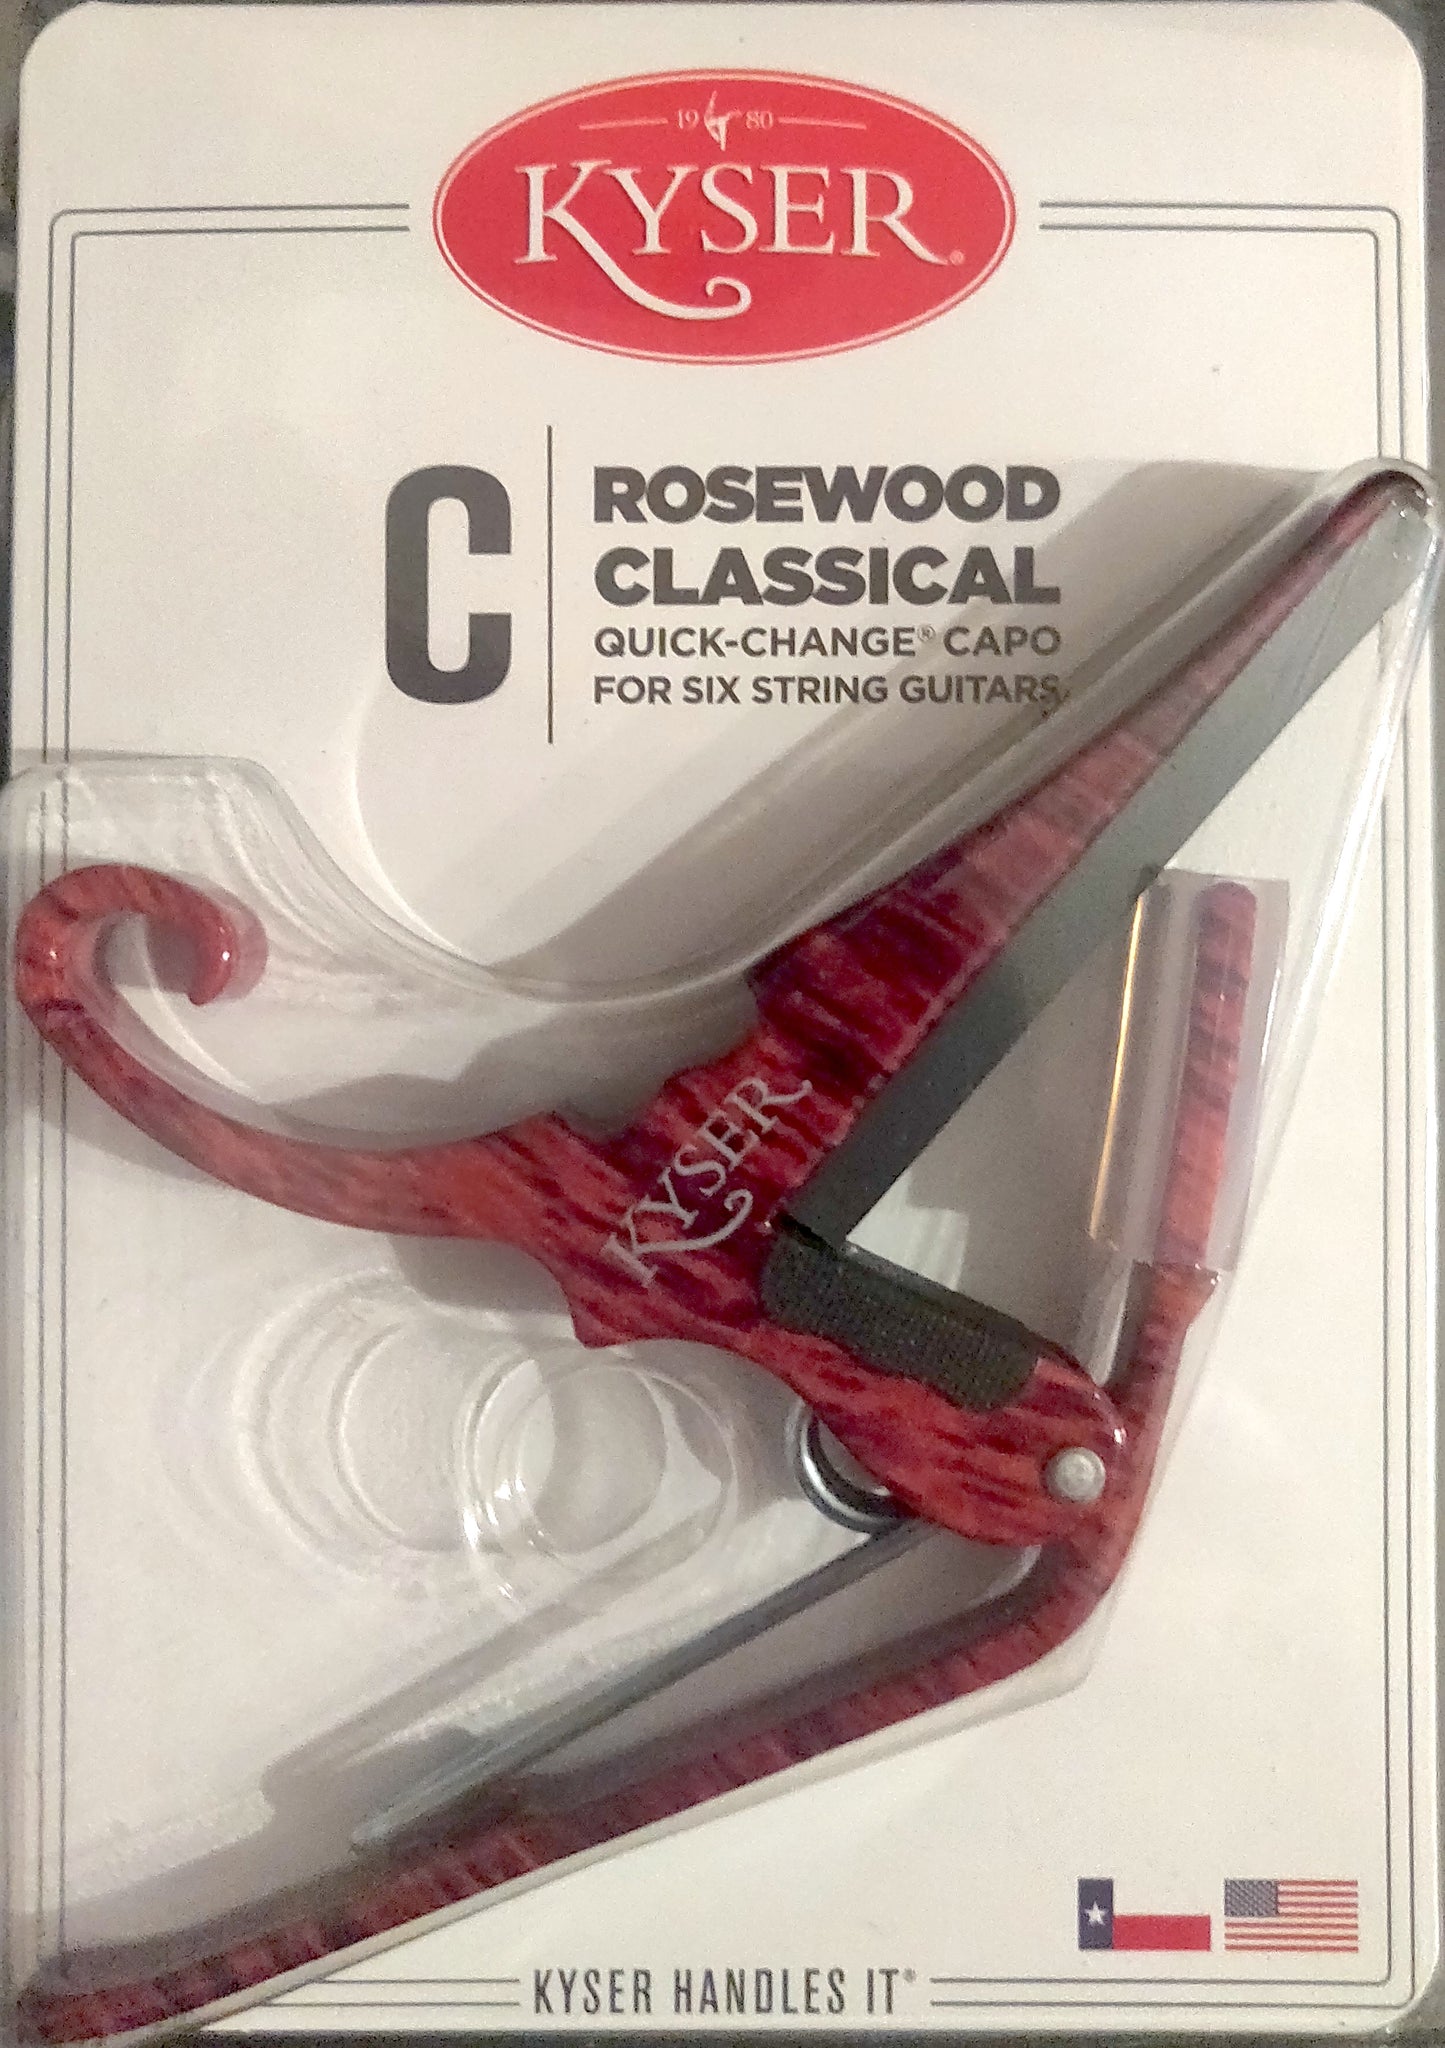 Kyser® Quick-Change Capo for CLASSICAL Guitars - Rosewood